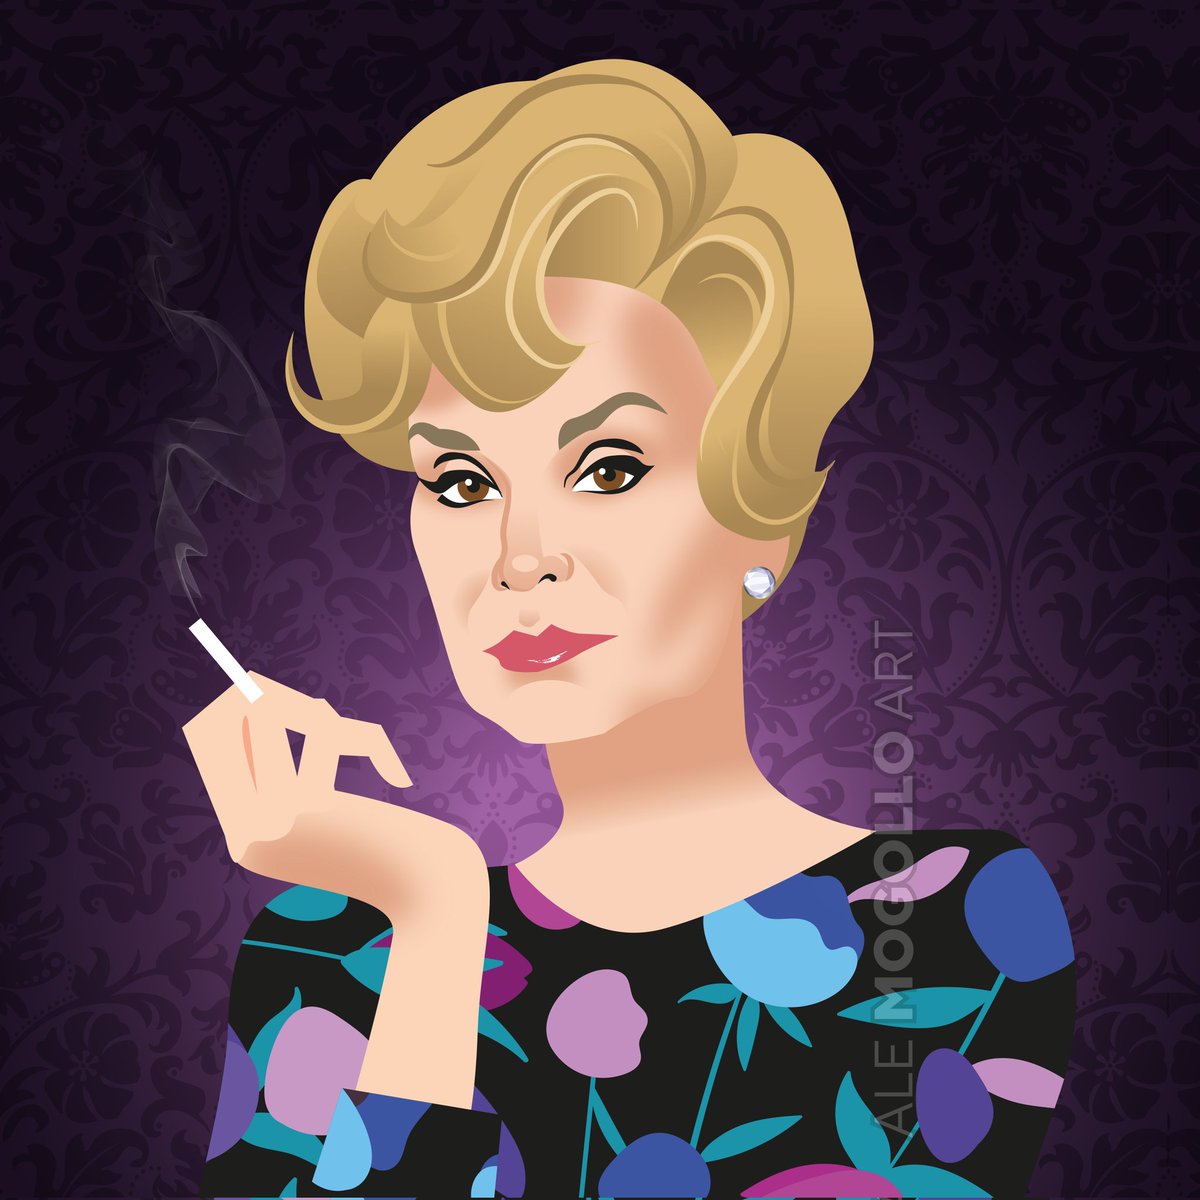 Happy birthday to the legendary Jessica Lange who is 74 years young today. Here in one of her latest iconic roles, Constance  in the first season of AHS. Were you a fan?
#jessicalange #AmericanHorrorStory #ahsmurderhouse #constancelangdon #tootsie #Frances #kingkong #musicbox